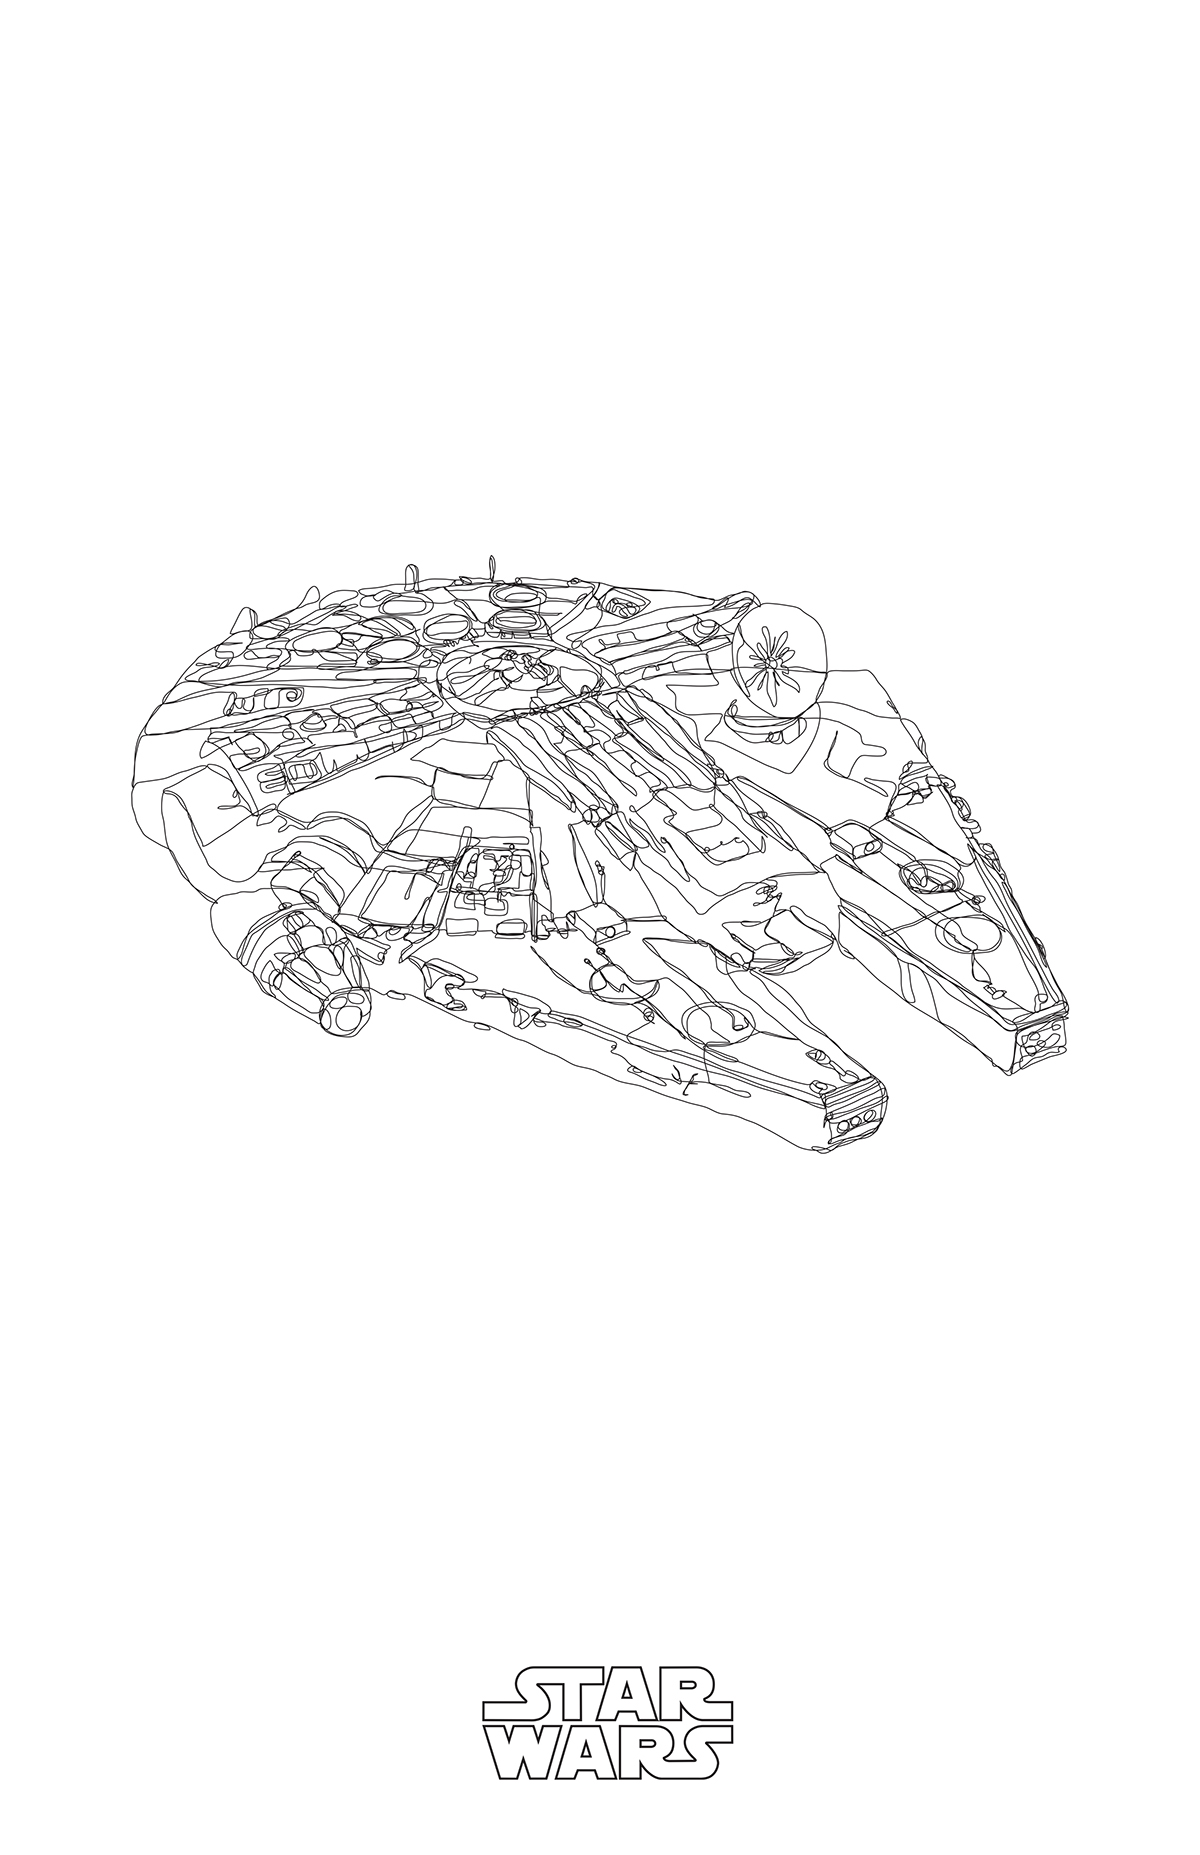 star wars C3P0 stars continuous line Sci Fi science fiction characters millenium falcon R2D2 at at Tie Fighter X-wing deathstar darth vader Movies